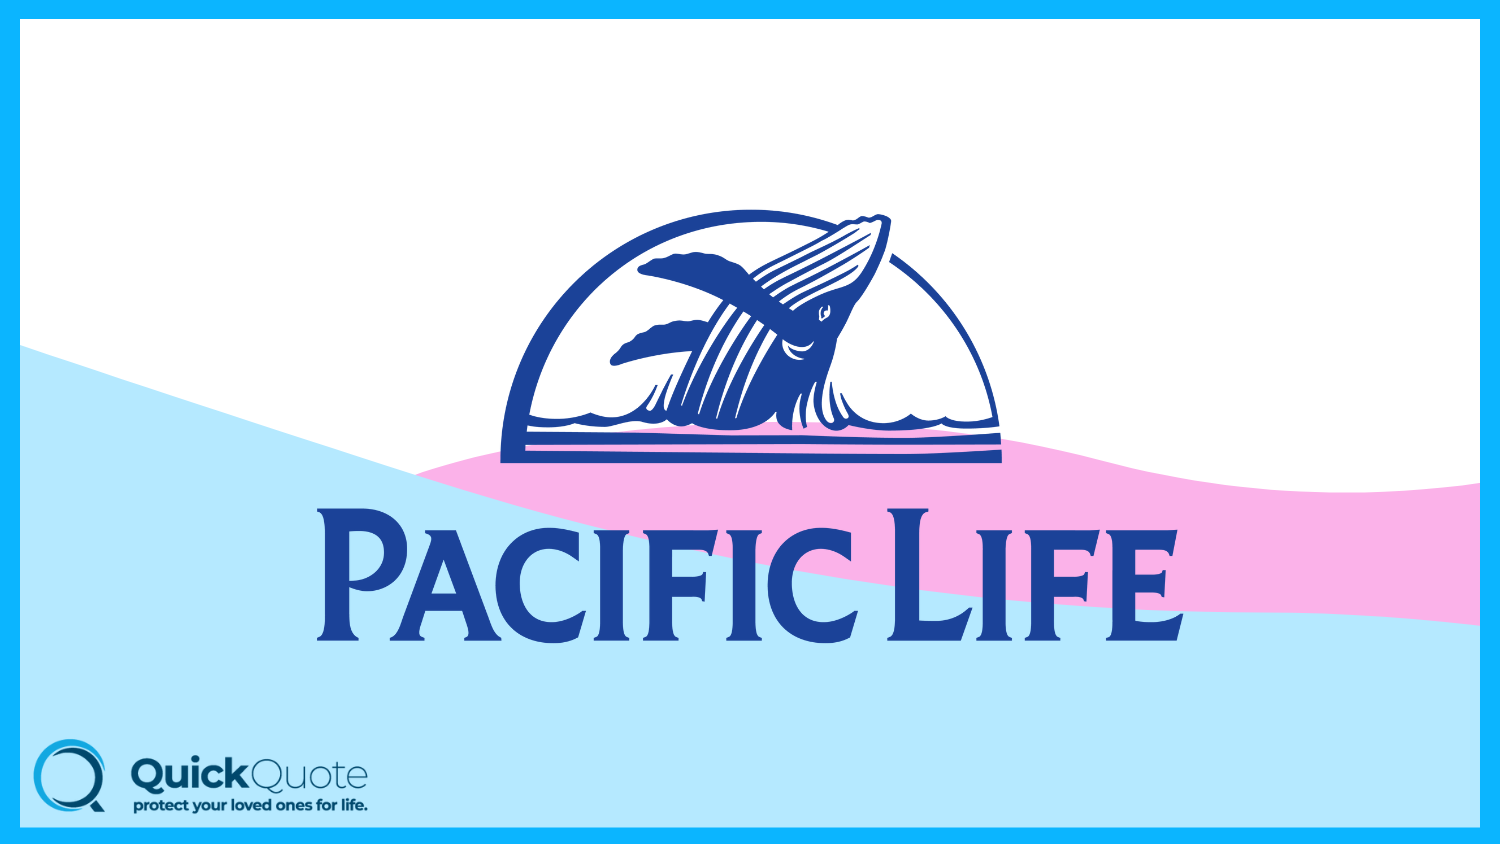 Pacific Life: Best Life Insurance for Alcoholics